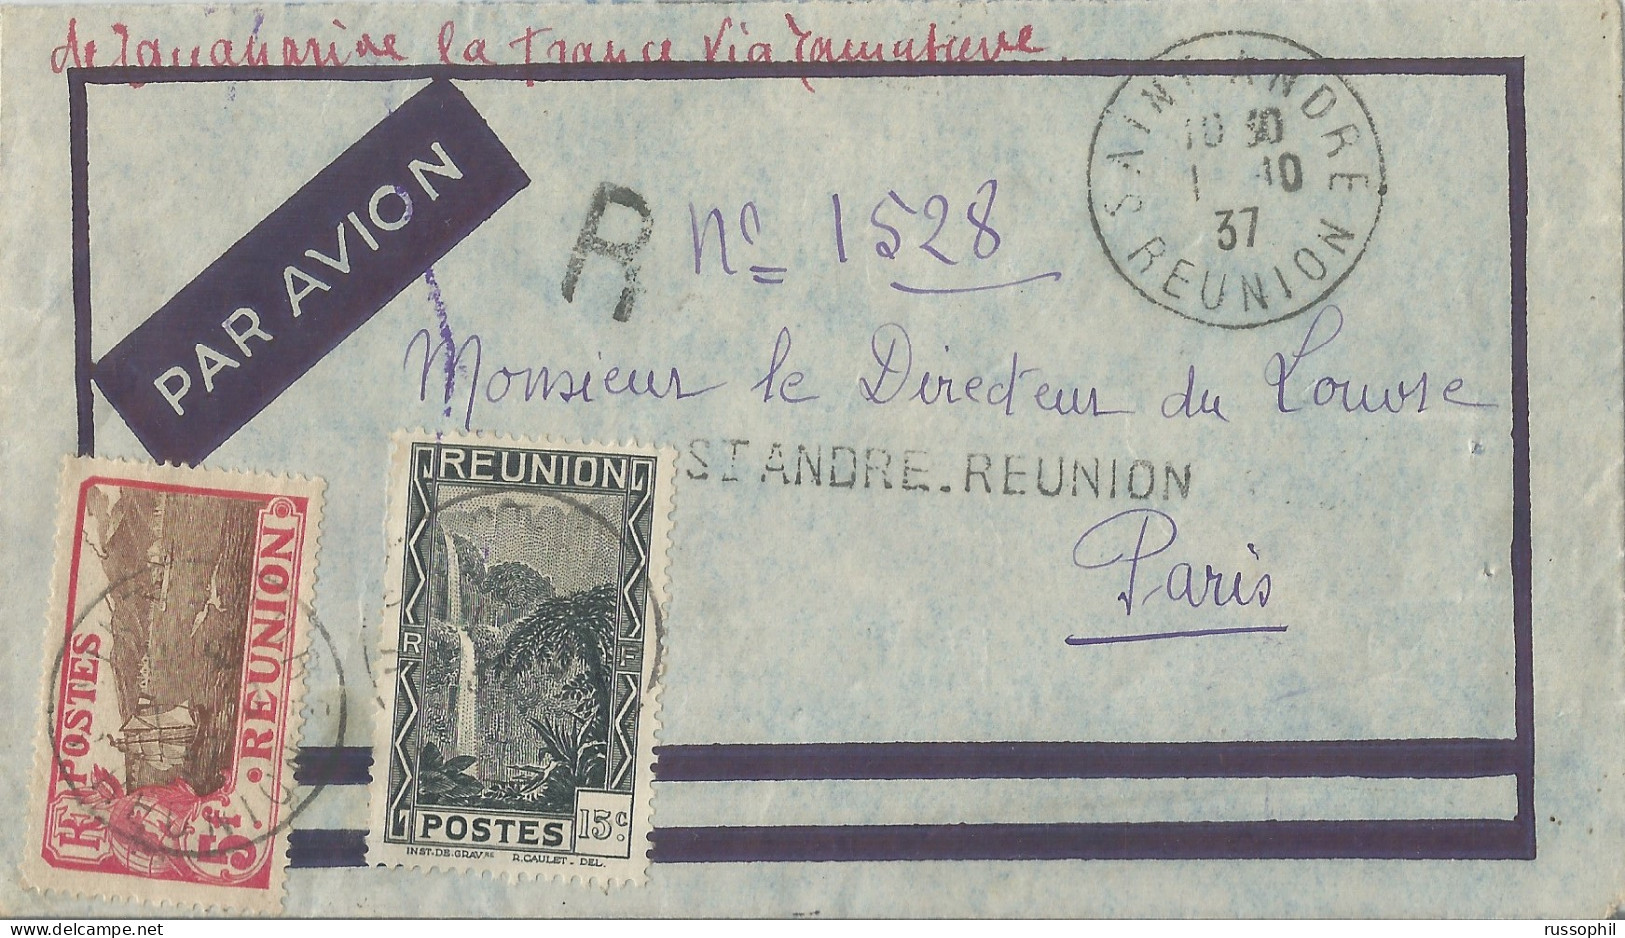 REUNION - 5 FR 15 CENT.  2 STAMP FRANKING ON REGISTERED AIR COVER FROM SAINT ANDRE TO MAINLAND FRANCE - 1937 - Briefe U. Dokumente